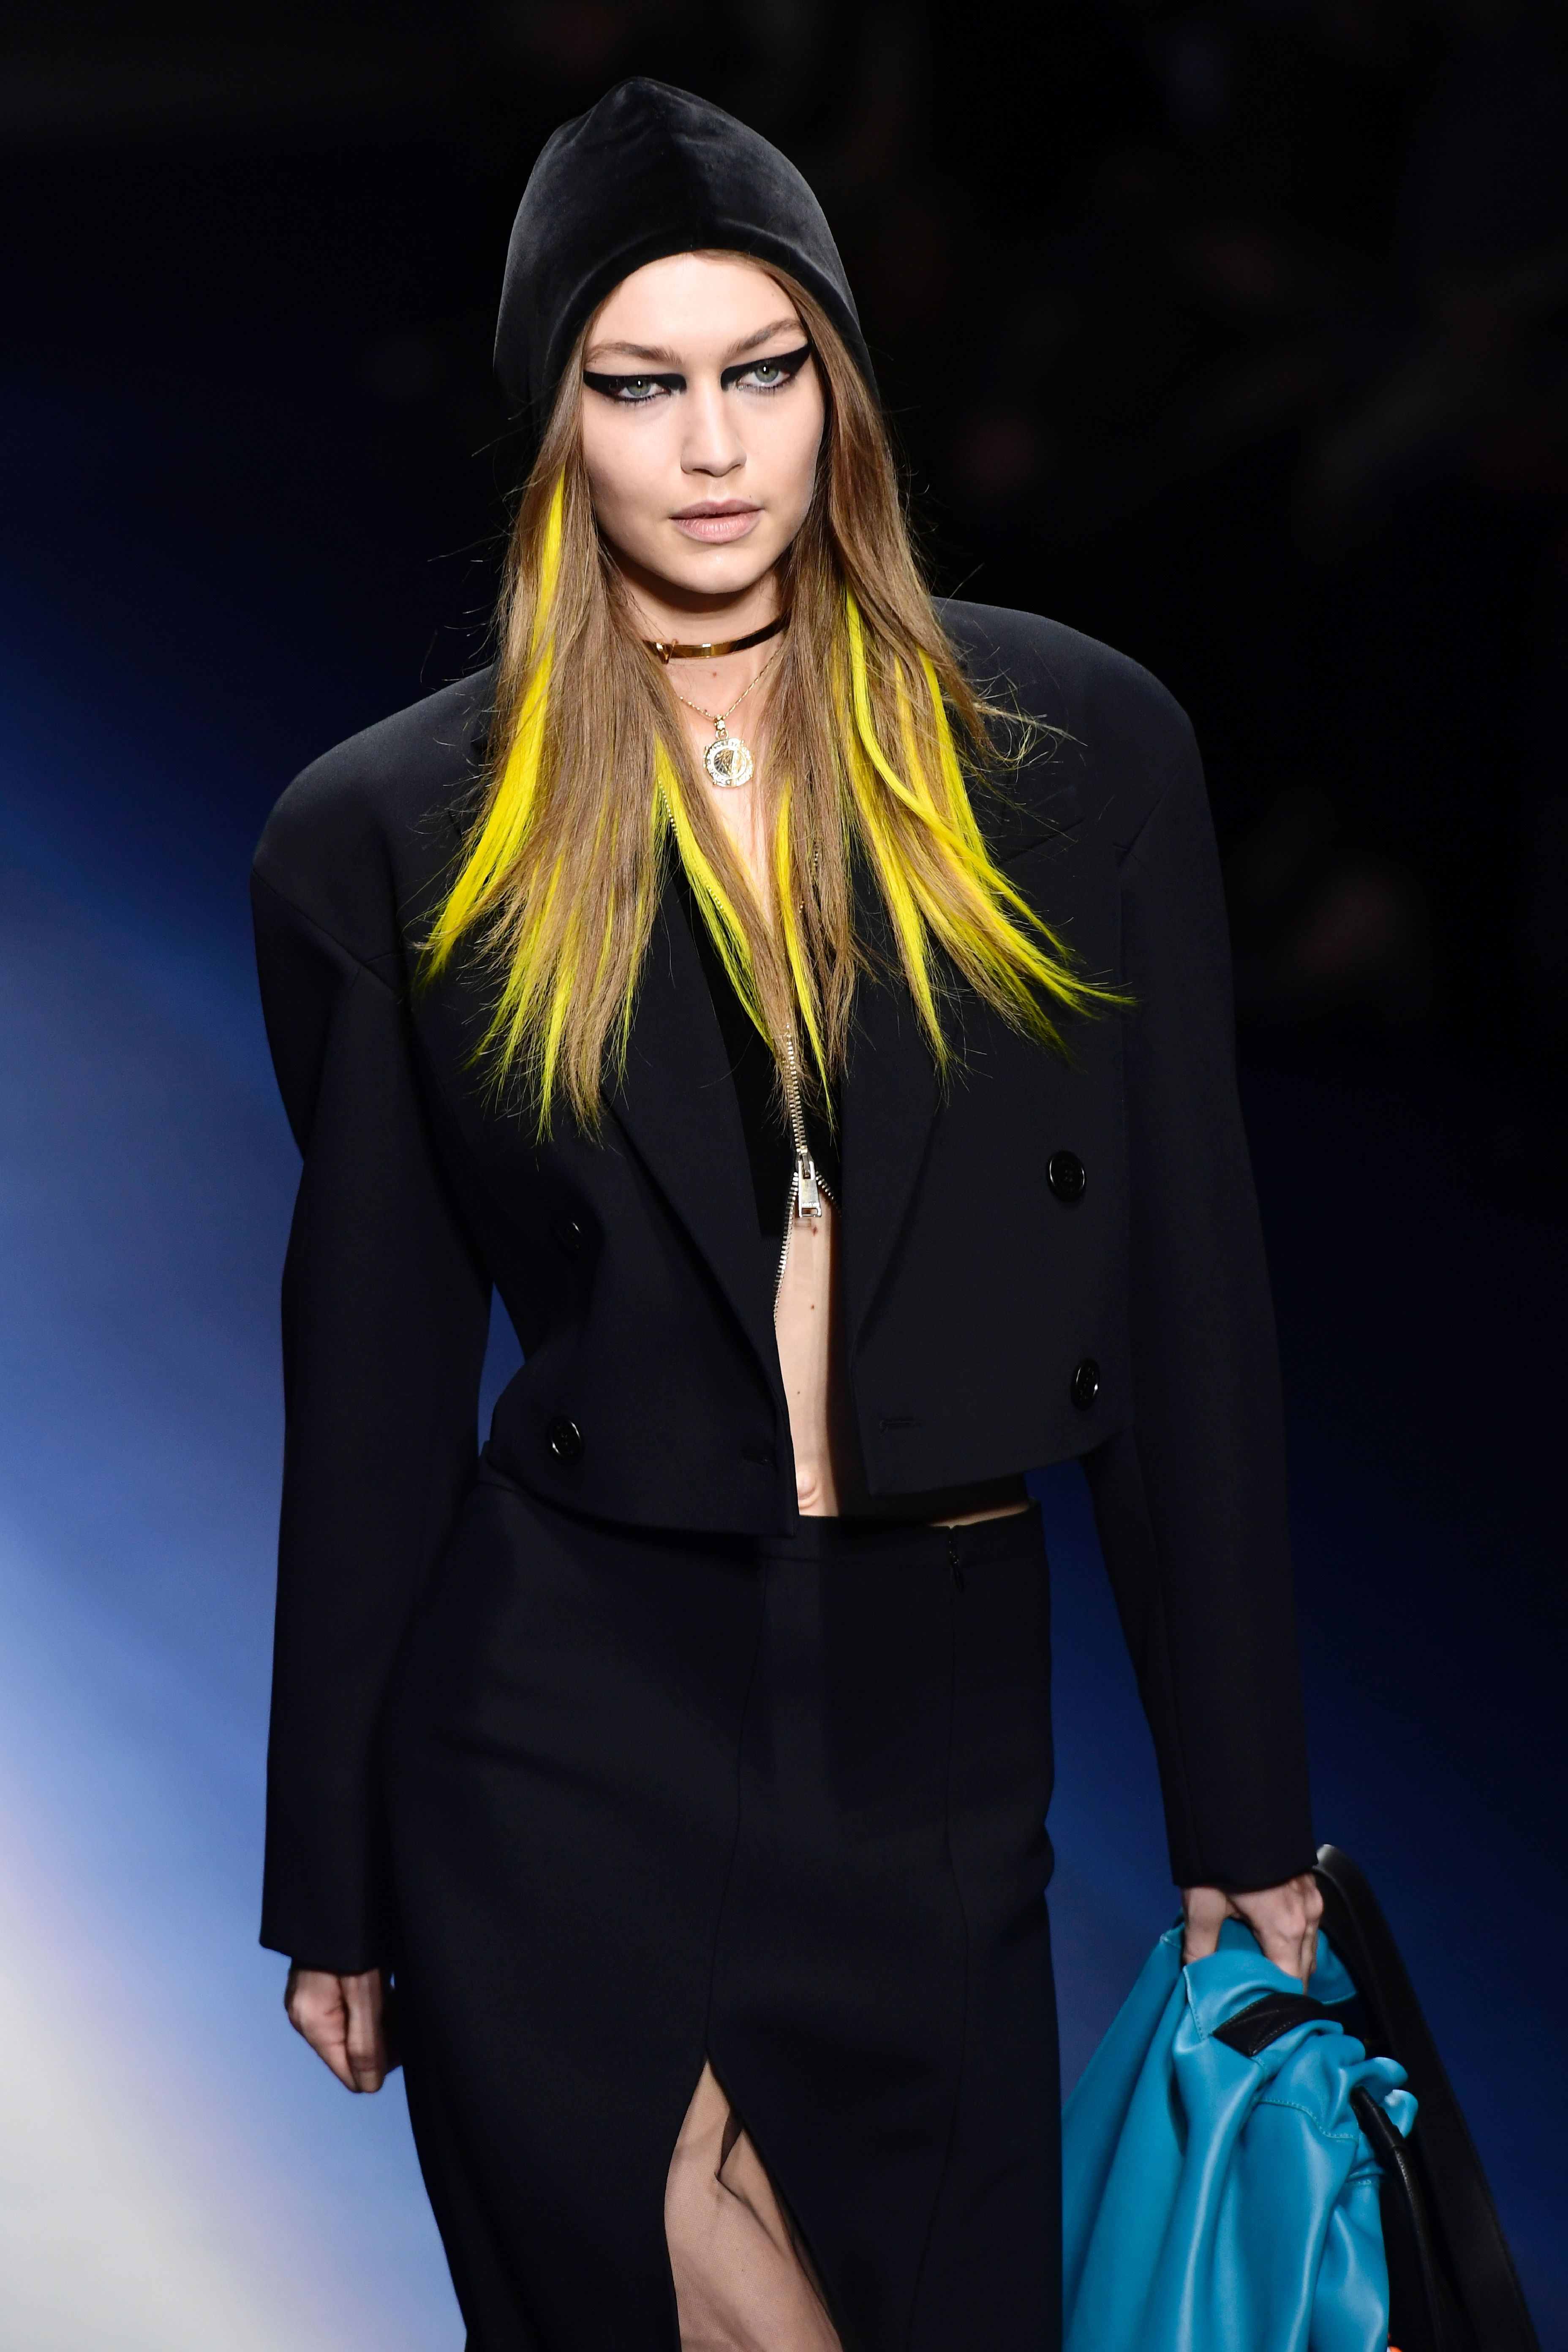 Model Gigi Hadid presents a creation for fashion house Versace during the Women's Fall/Winter 2017/2018 fashion week in Milan, on February 23, 2017. / AFP PHOTO / Miguel MEDINA